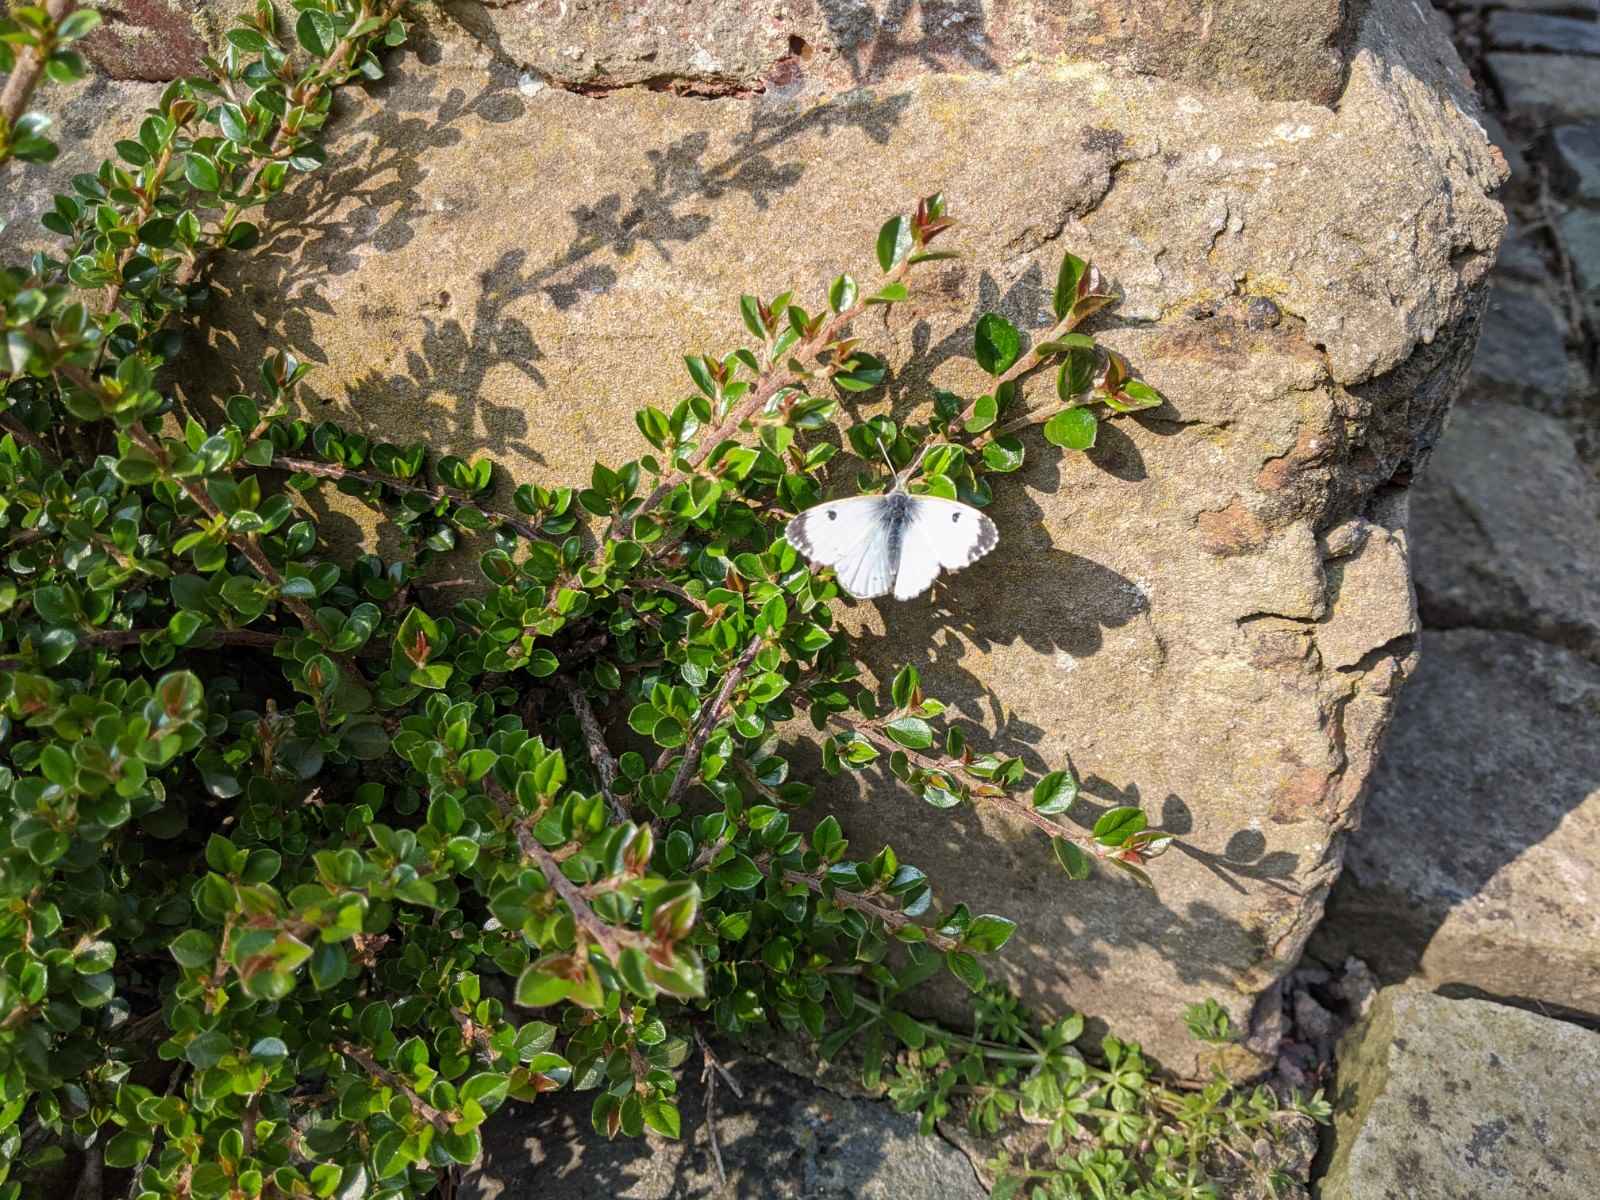 Small White butterfly near the Green Farm, April 21st 2021